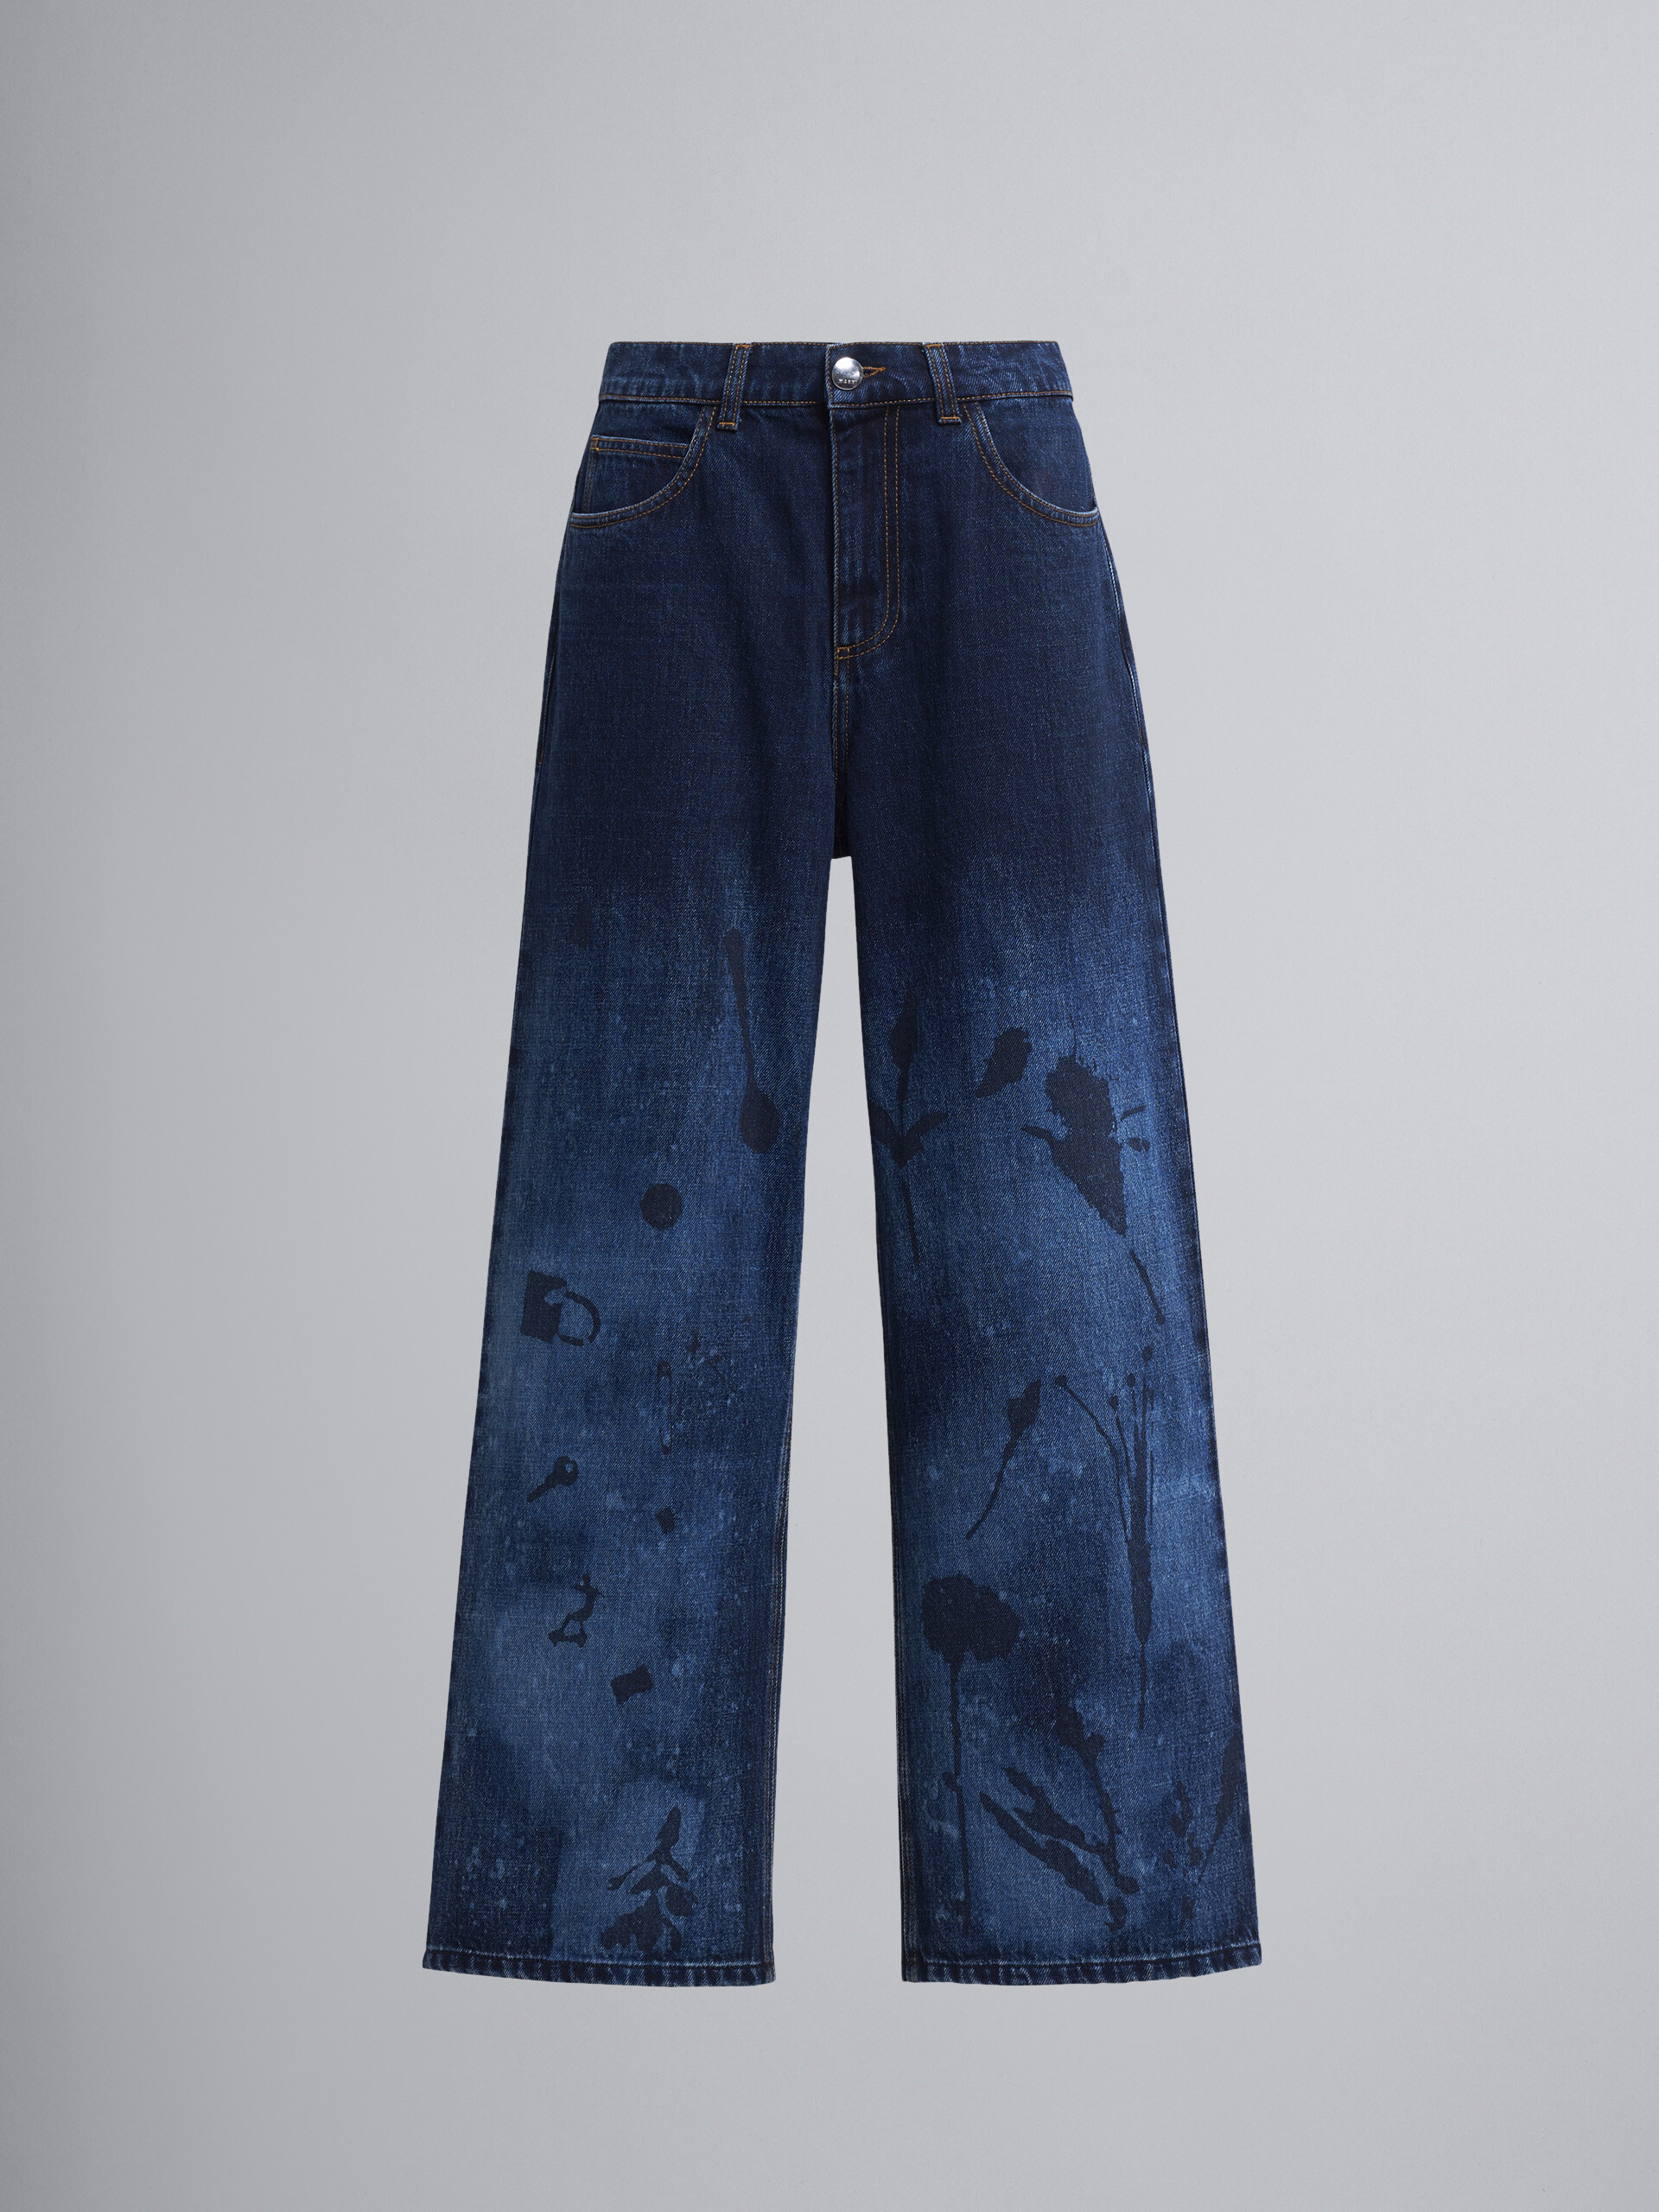 Lucky Charms print denim trousers - Pants - Image 1